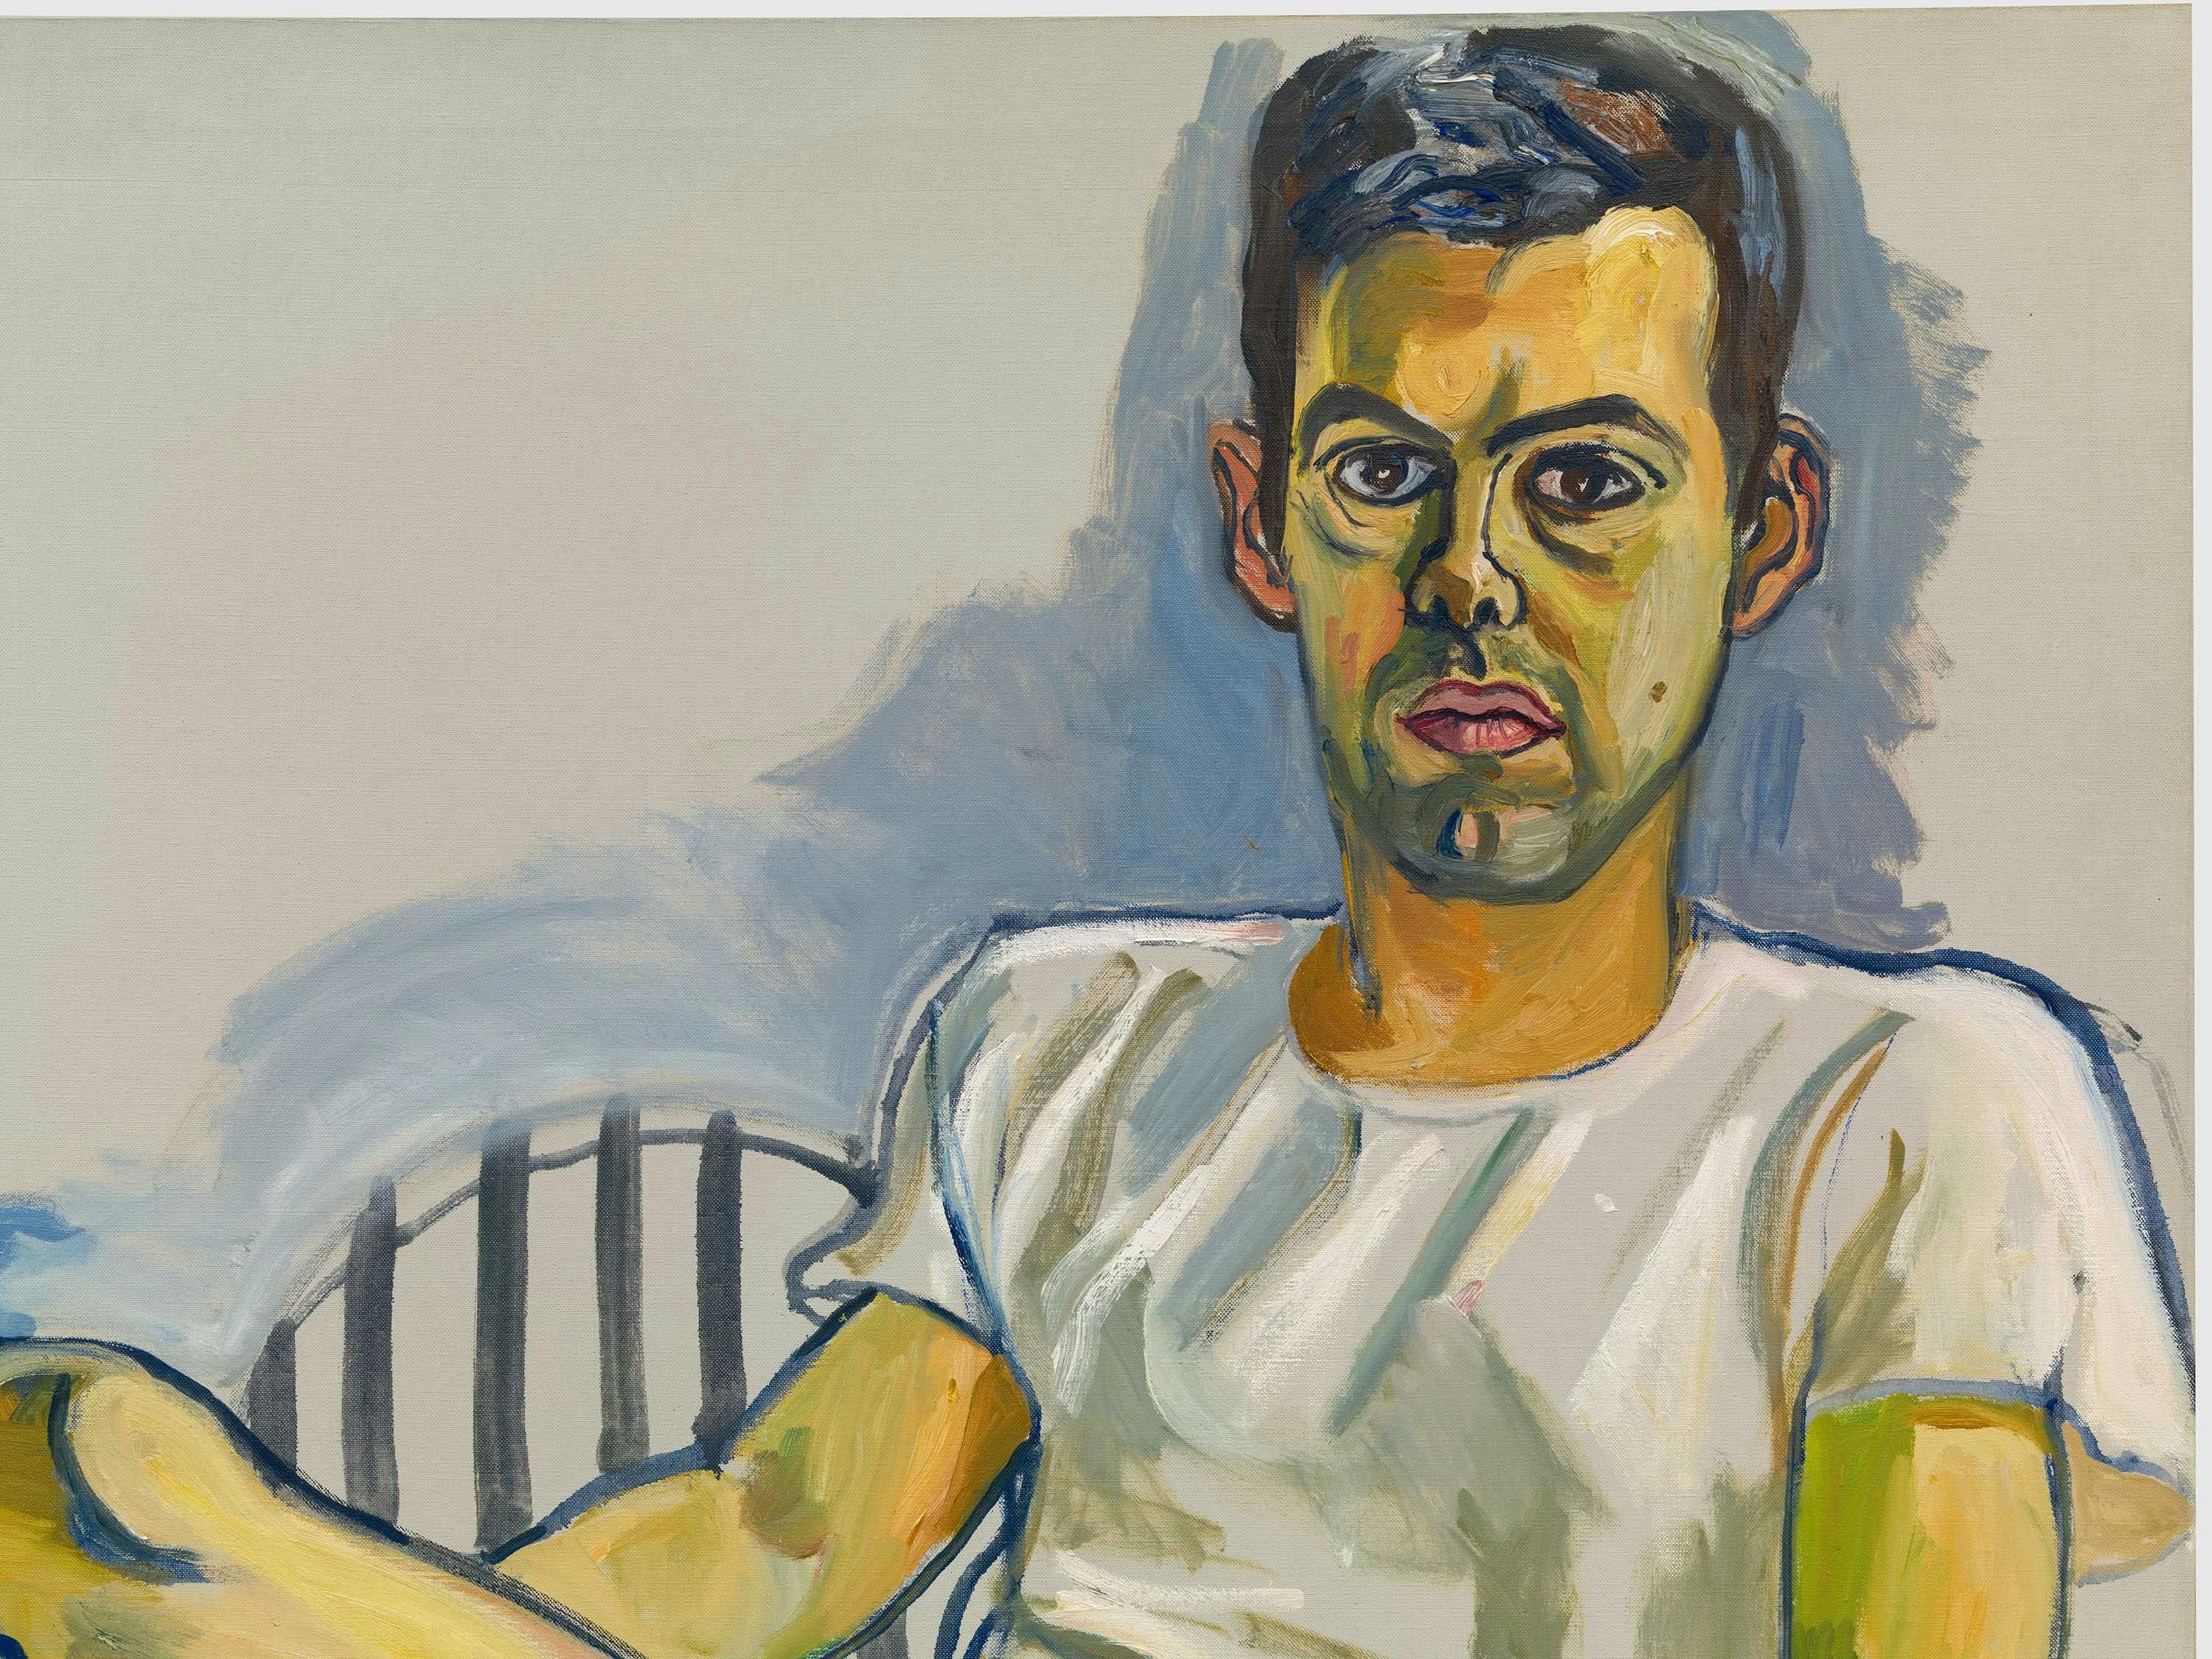 A detail from a painting by Alice Neel, titled Alice Neel Richard, dated 1967.